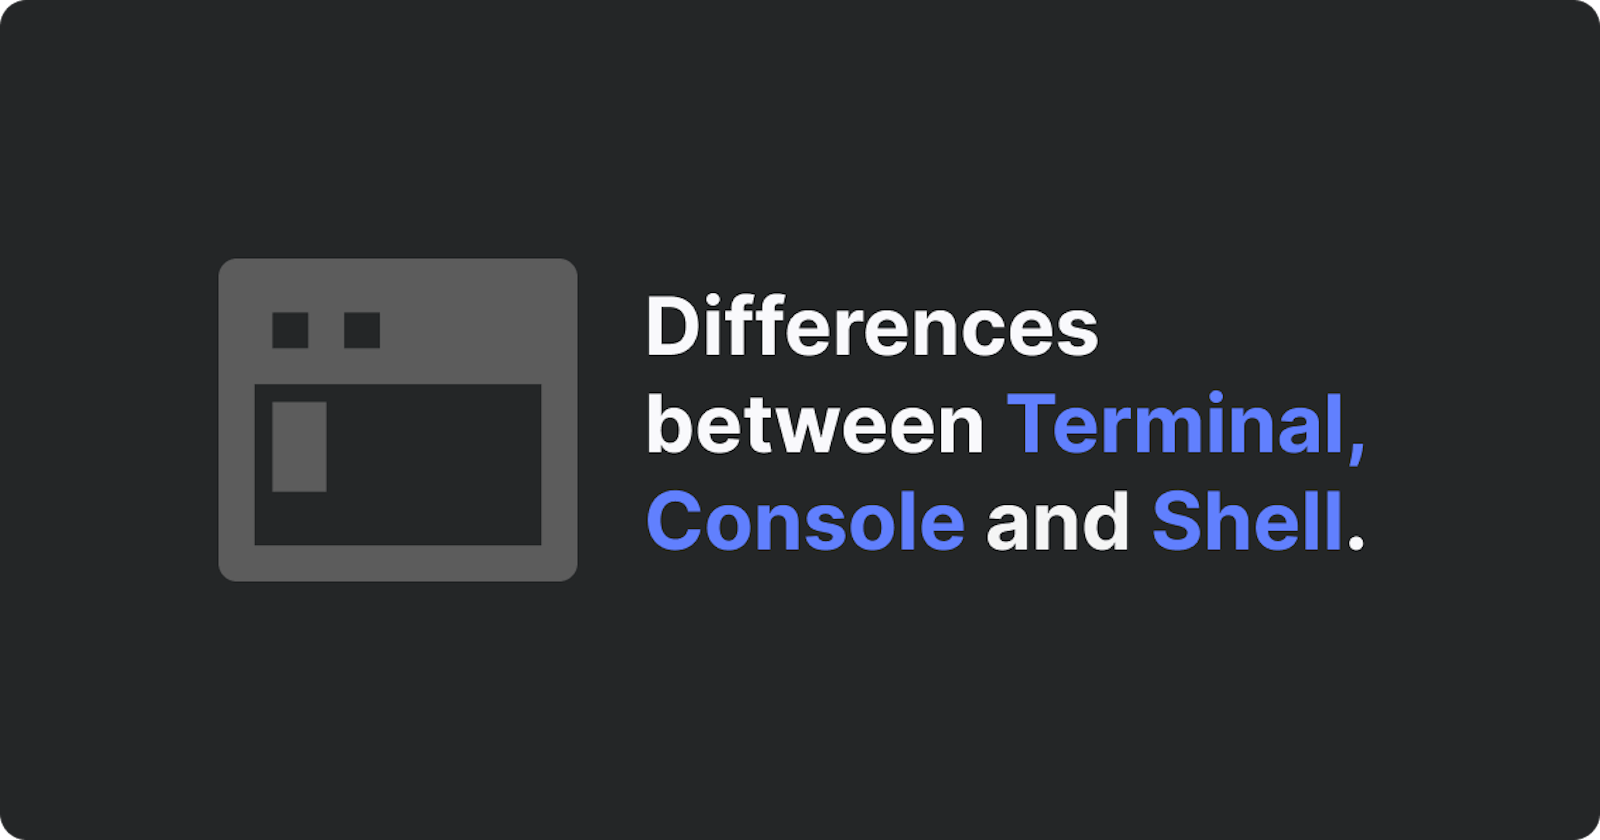 Differences between 'Terminal', 'Console' and 'Shell'